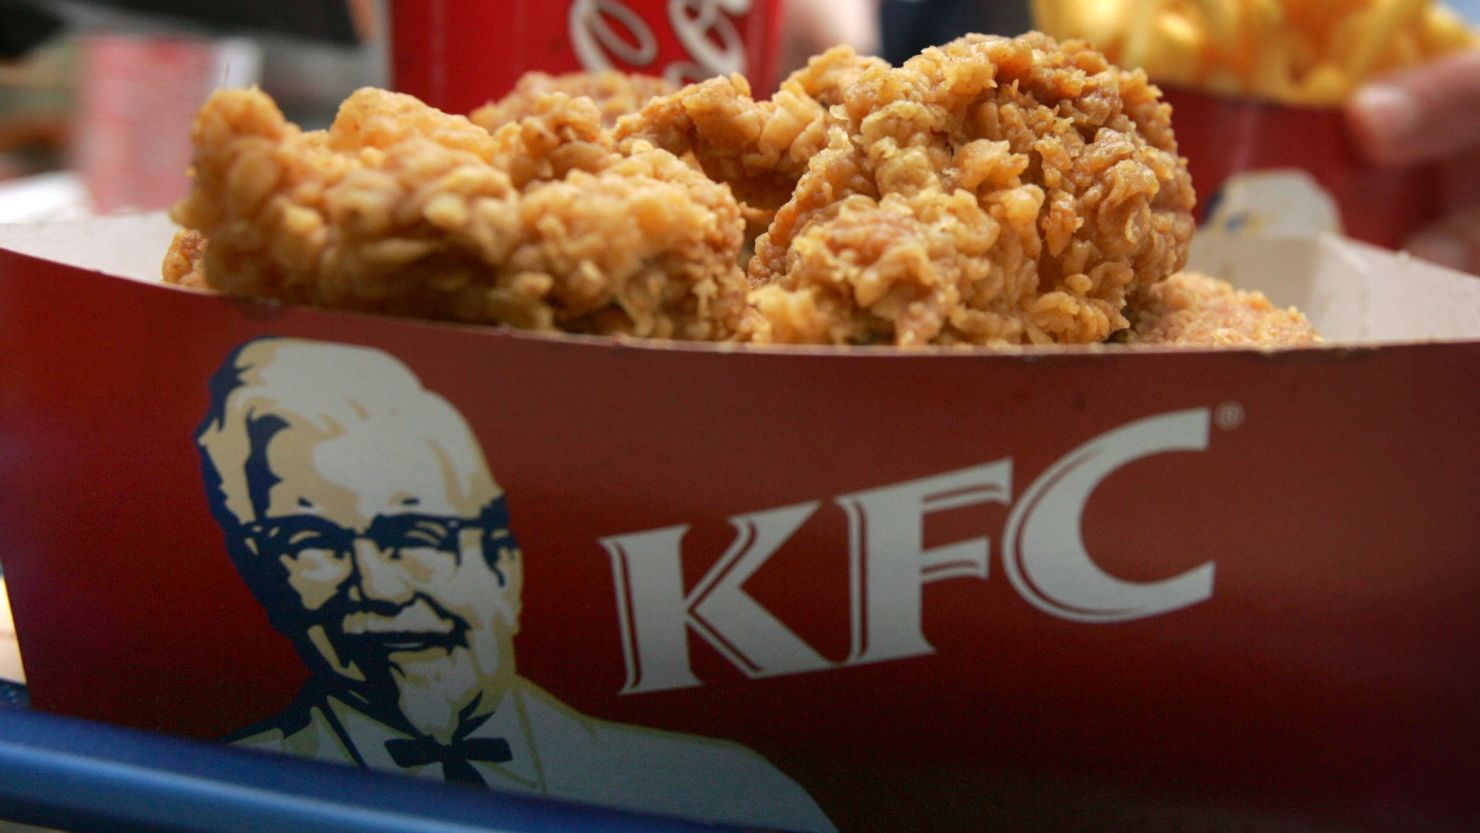 The Kentucky Fried Chicken Foundation awards more than 75 scholarships a year, including one based on Twitter messages.